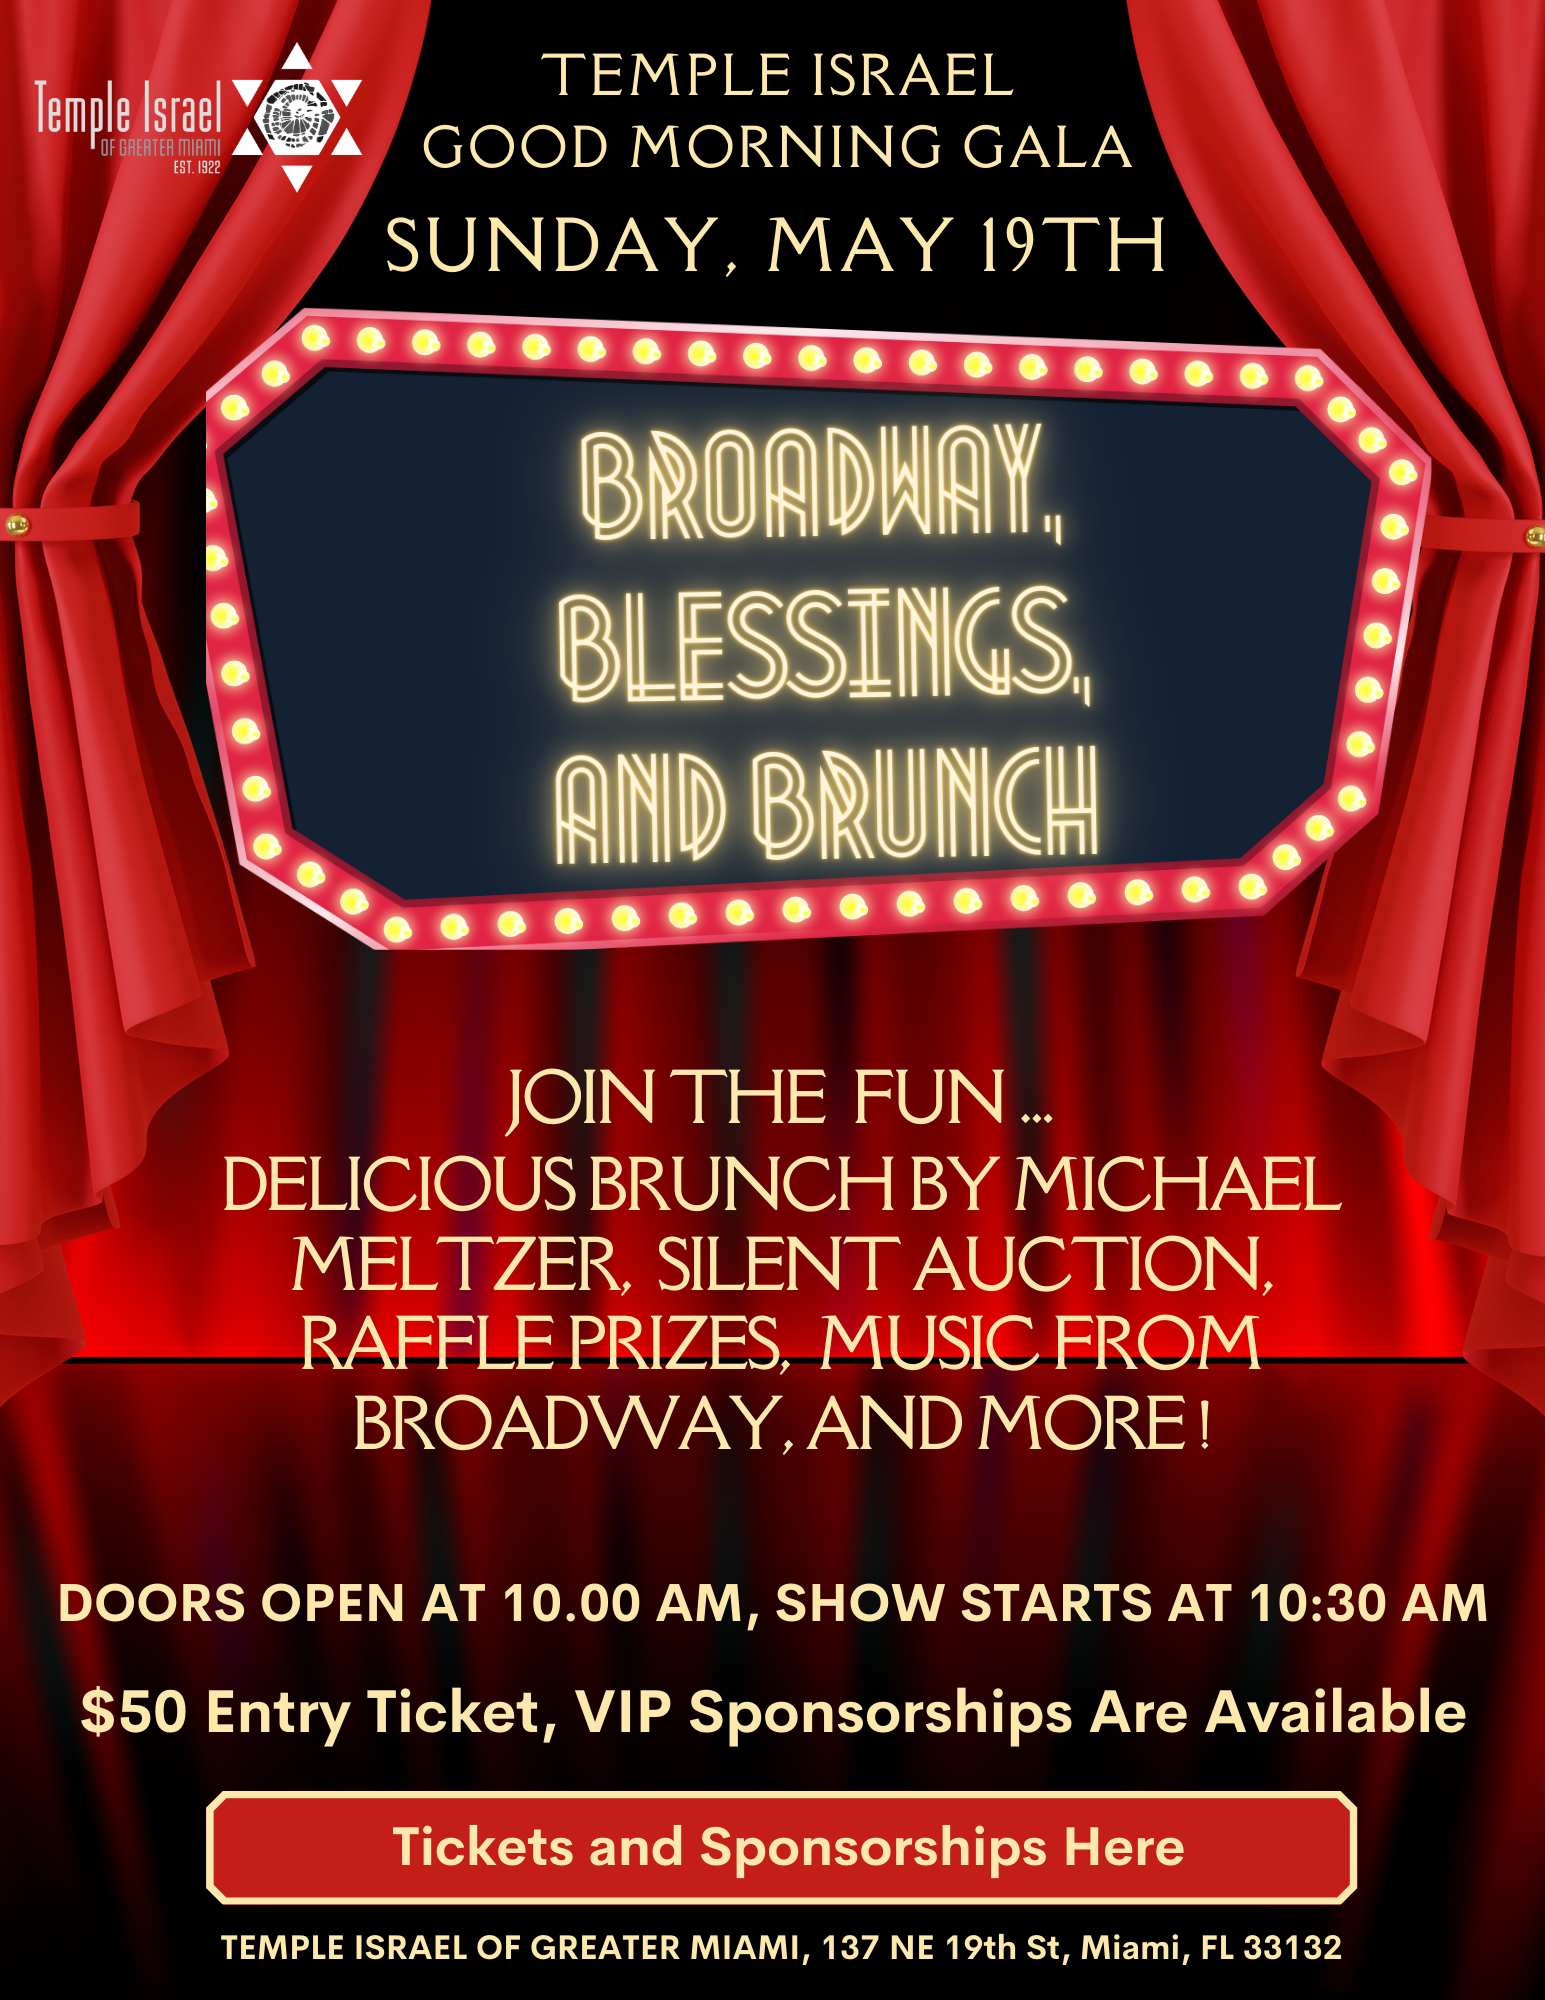 Broadway, Blessings And Brunch